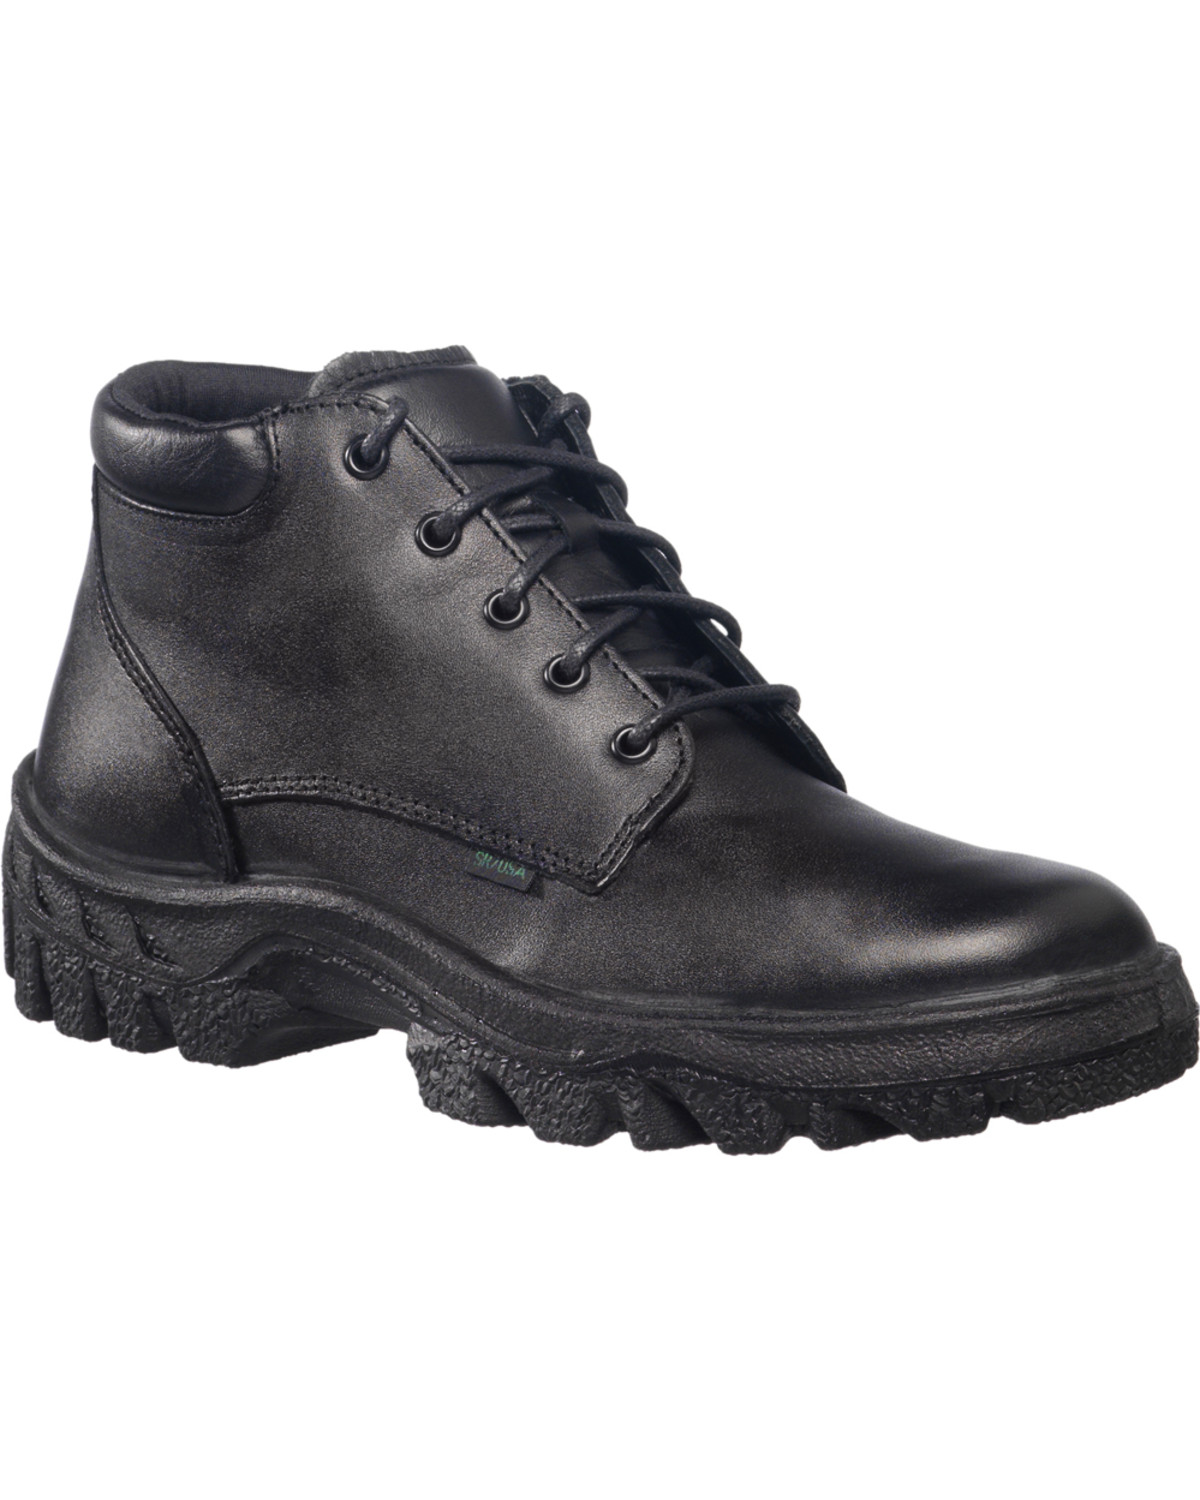 Rocky Women's TMC Postal Approved Chukka Military Boots